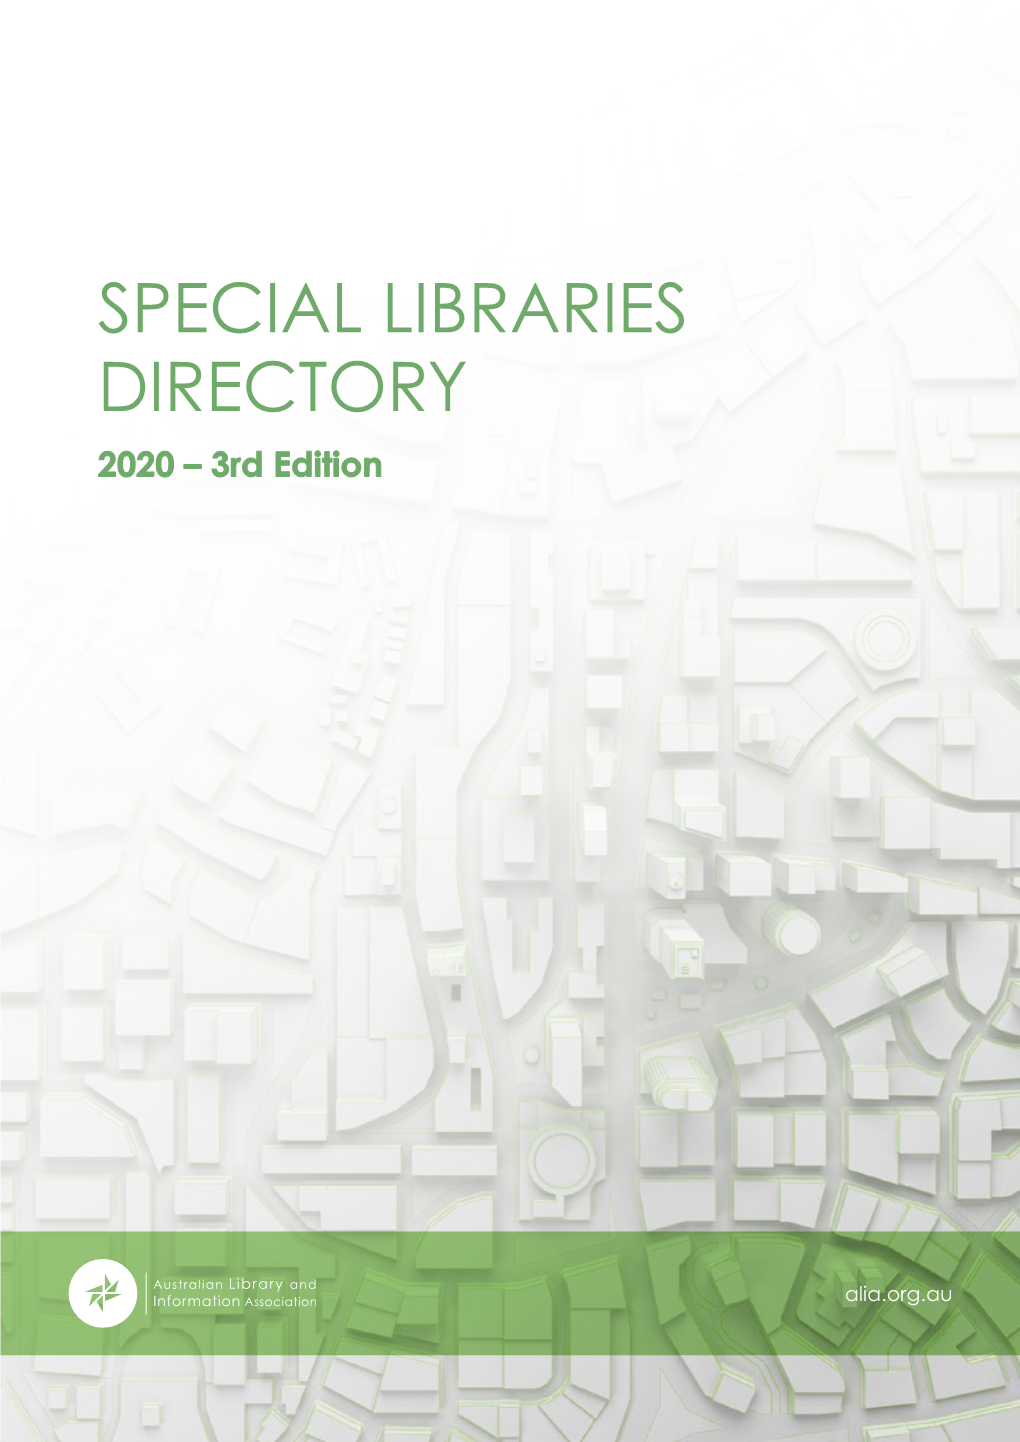 SPECIAL LIBRARIES DIRECTORY 2020 – 3Rd Edition